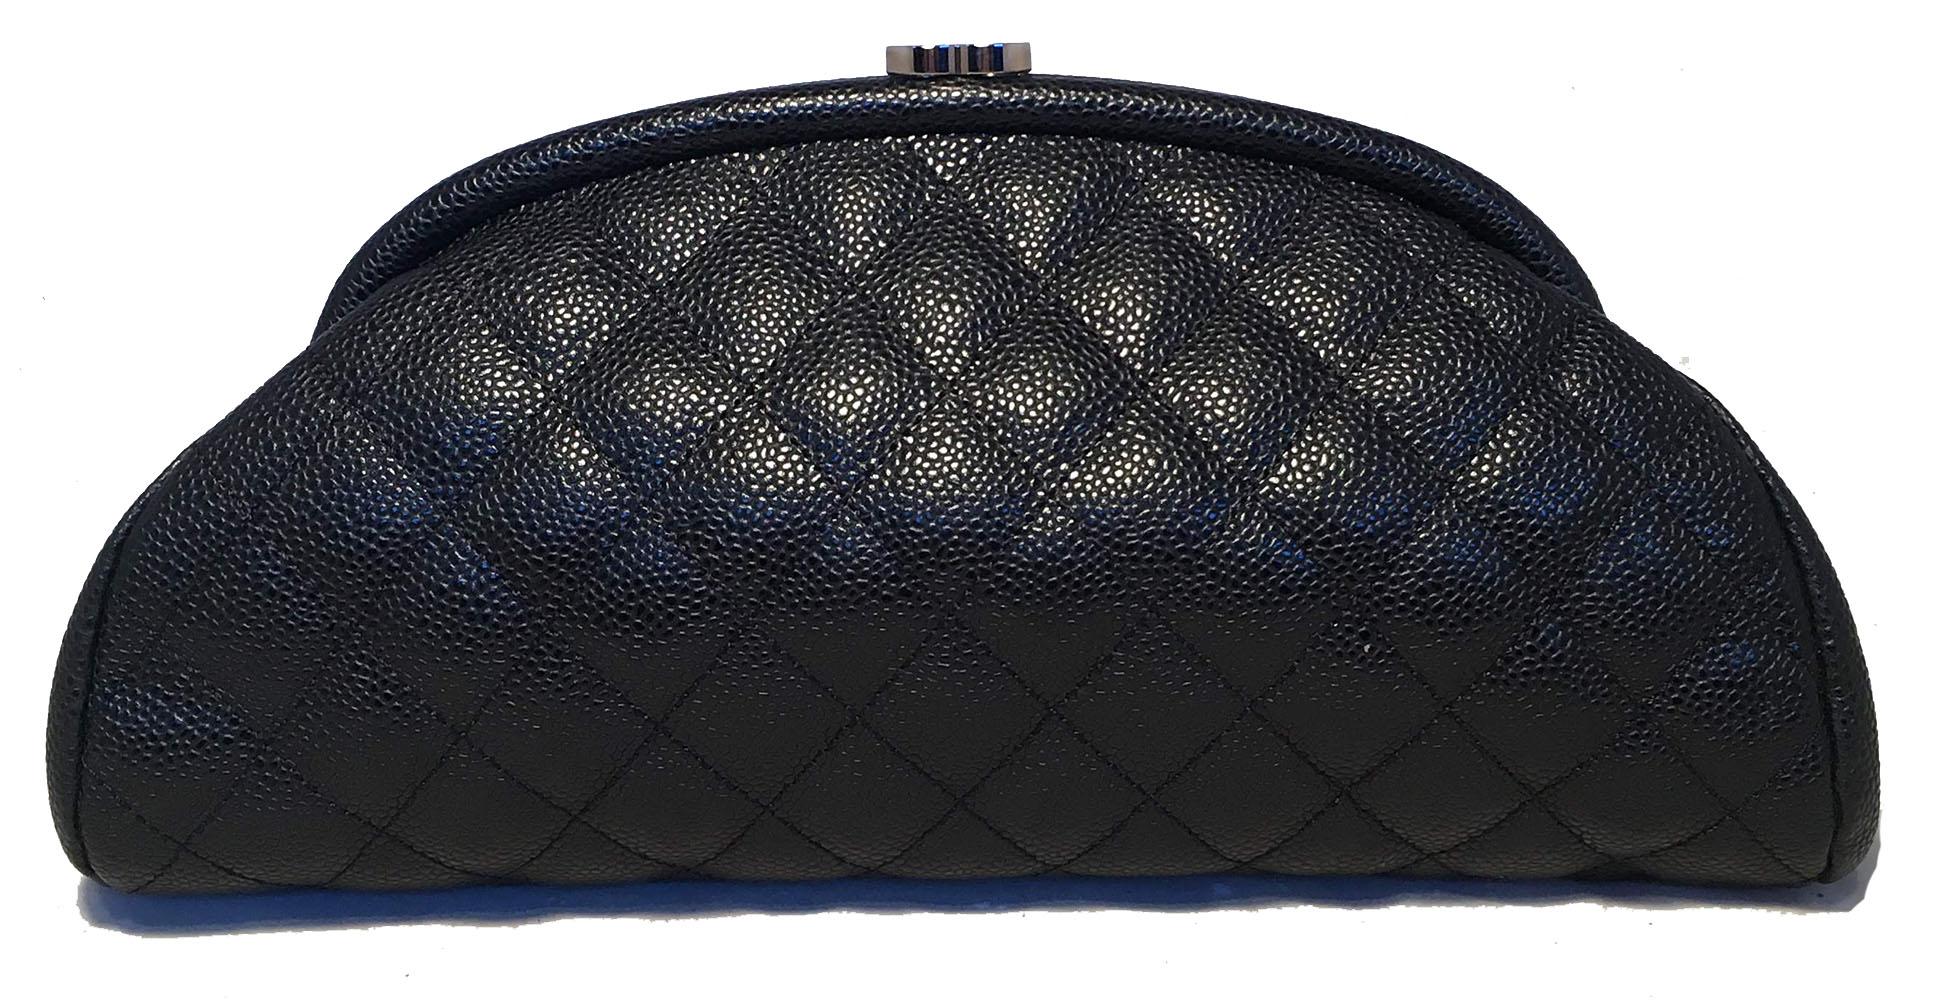 Chanel Black Quilted Caviar Timeless Clutch in excellent condition. Black quilted caviar leather exterior trimmed with a delicate silver CC logo lift closure along top exterior edge. Black leather lined interior with one side zipped pocket. No